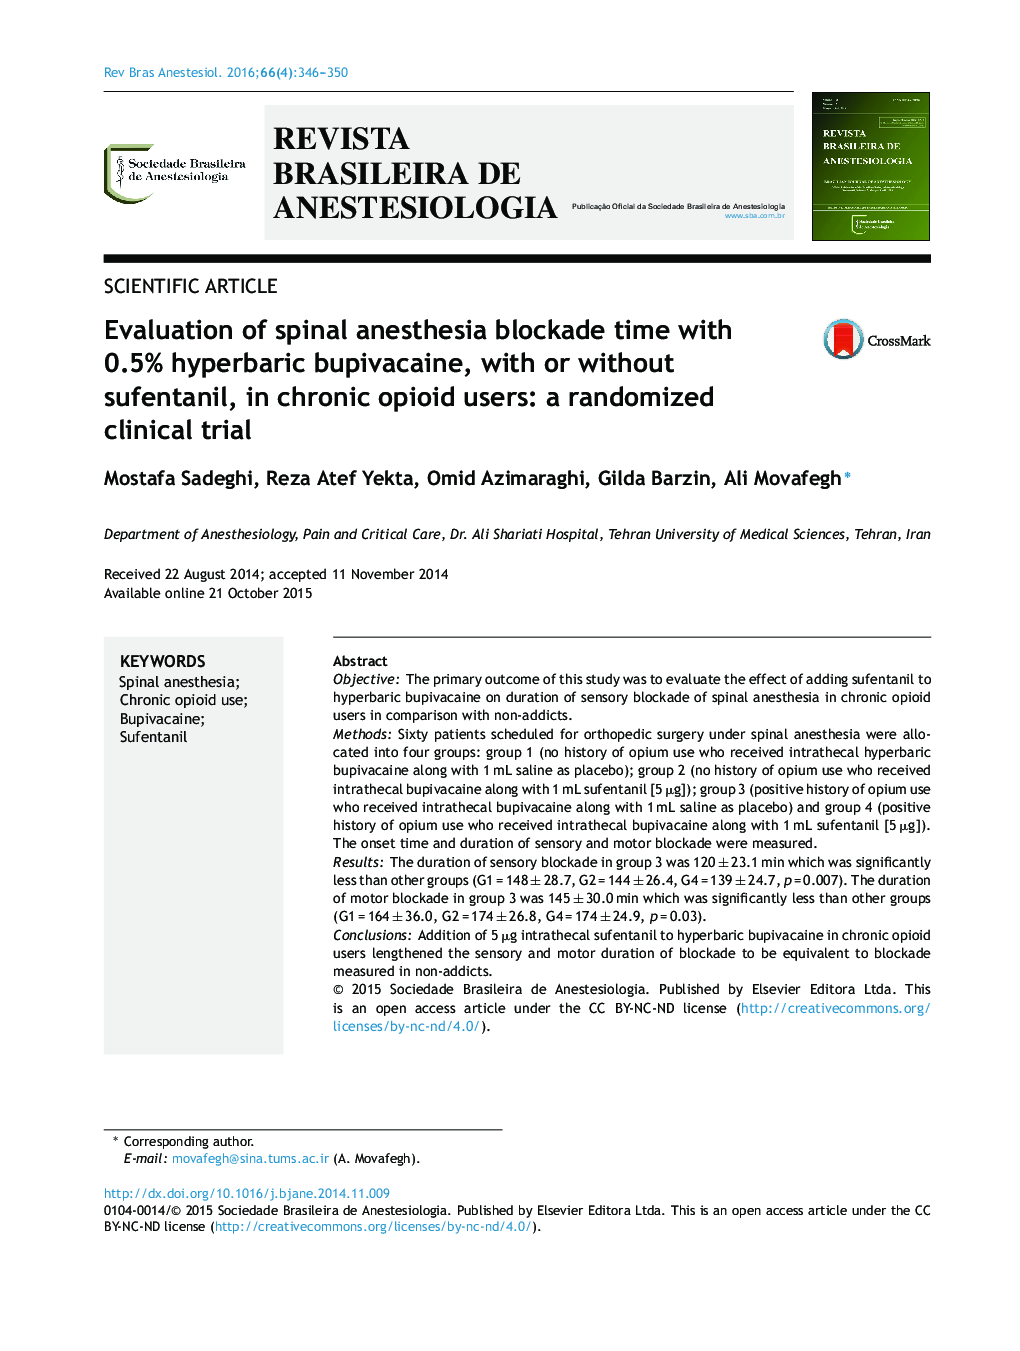 Evaluation of spinal anesthesia blockade time with 0.5% hyperbaric bupivacaine, with or without sufentanil, in chronic opioid users: a randomized clinical trial